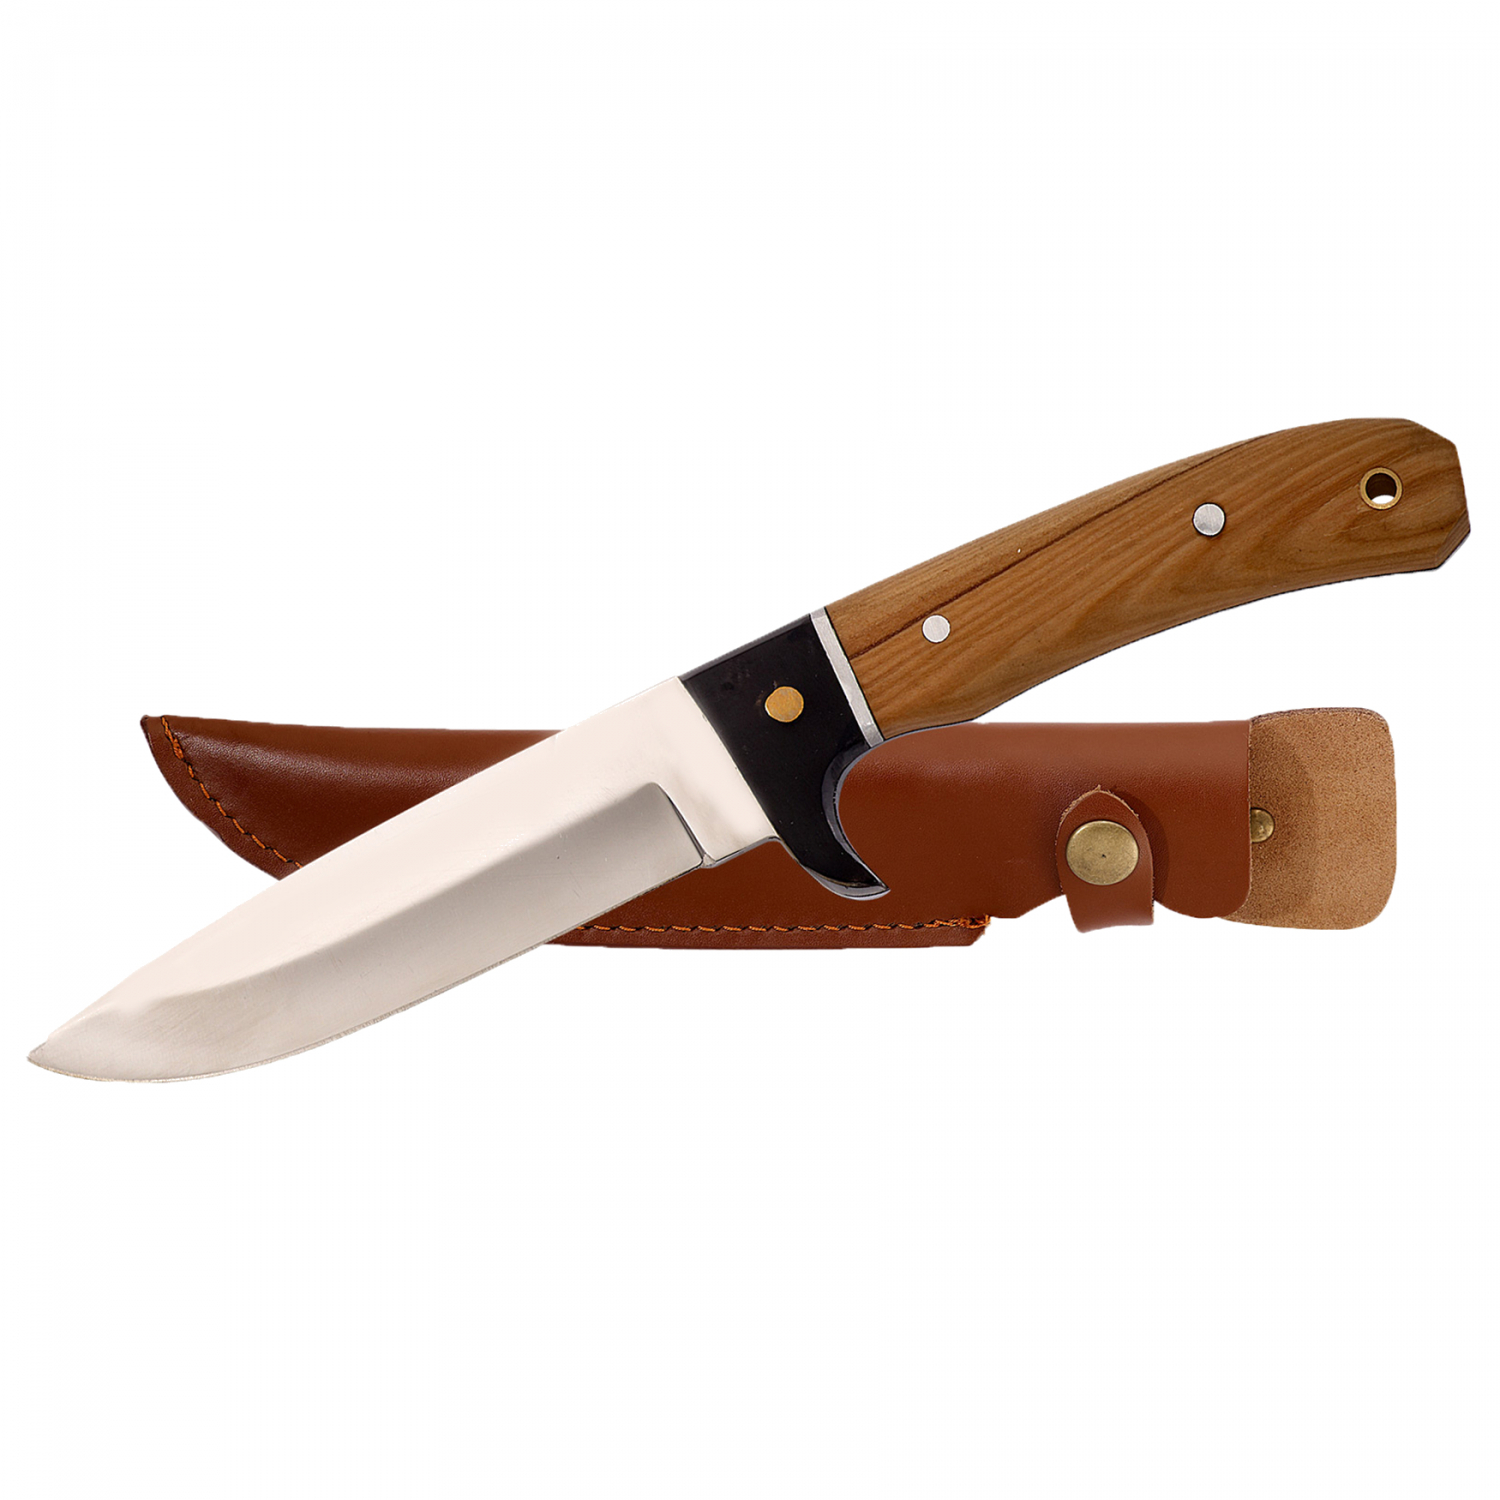 Whitefox Hunting and Fishing Knife Südheide at low prices